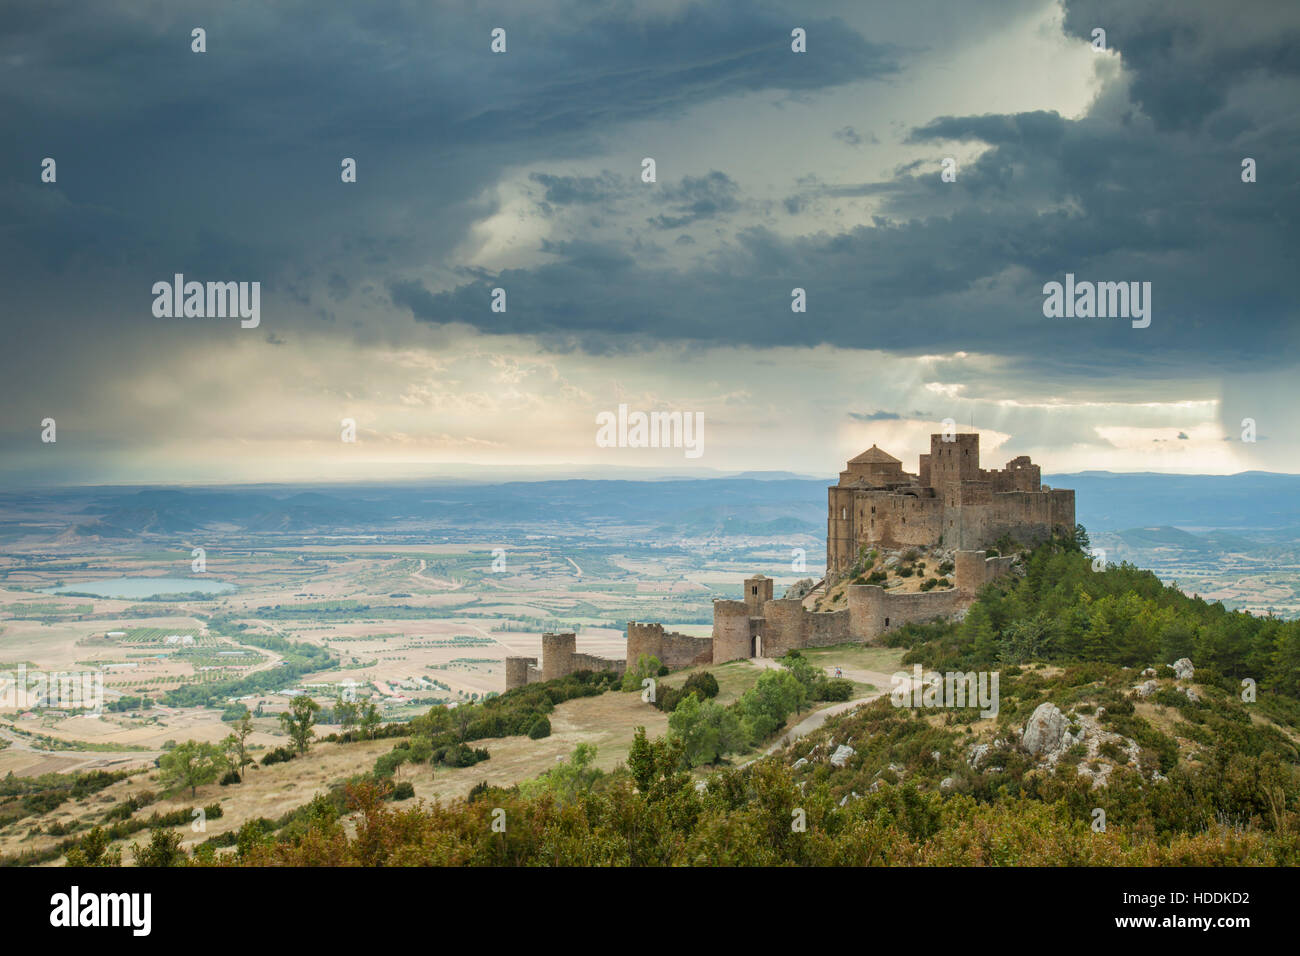 Stormy clouds over Romanesque castle at Loarre, Huesca, Spain. Stock Photo